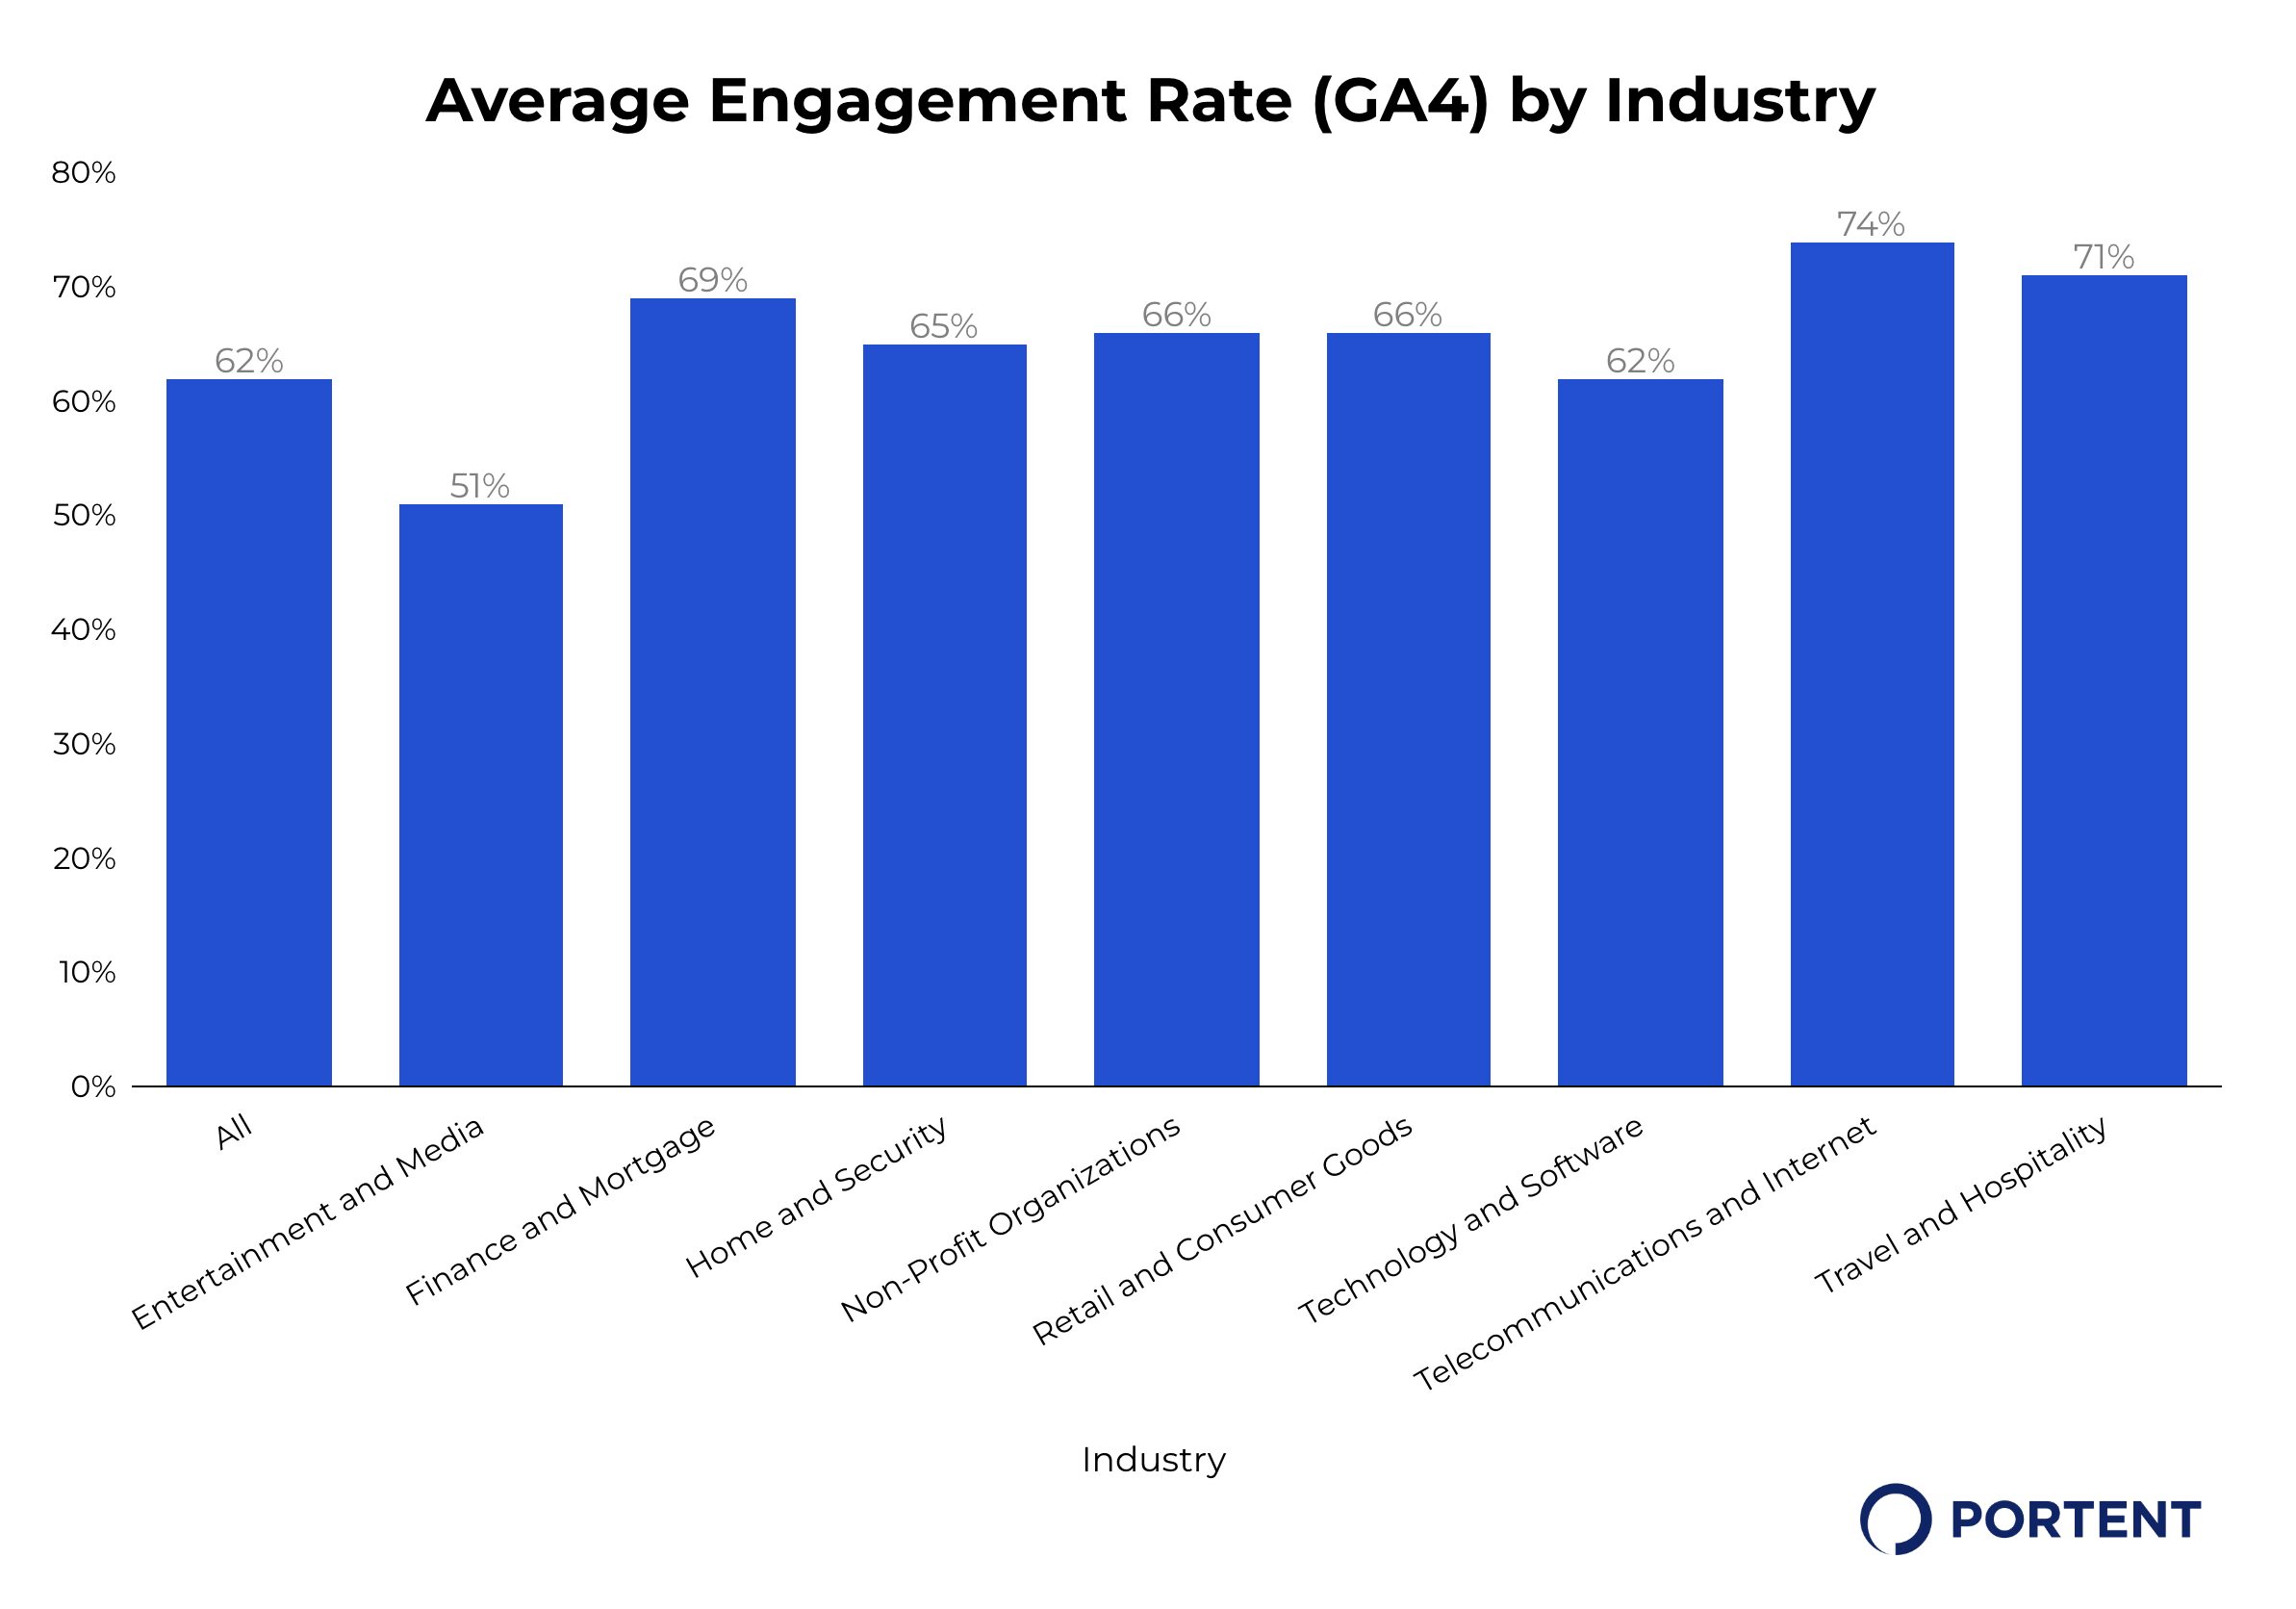 Bar chart depicting average engagement rate (GA4) by industry